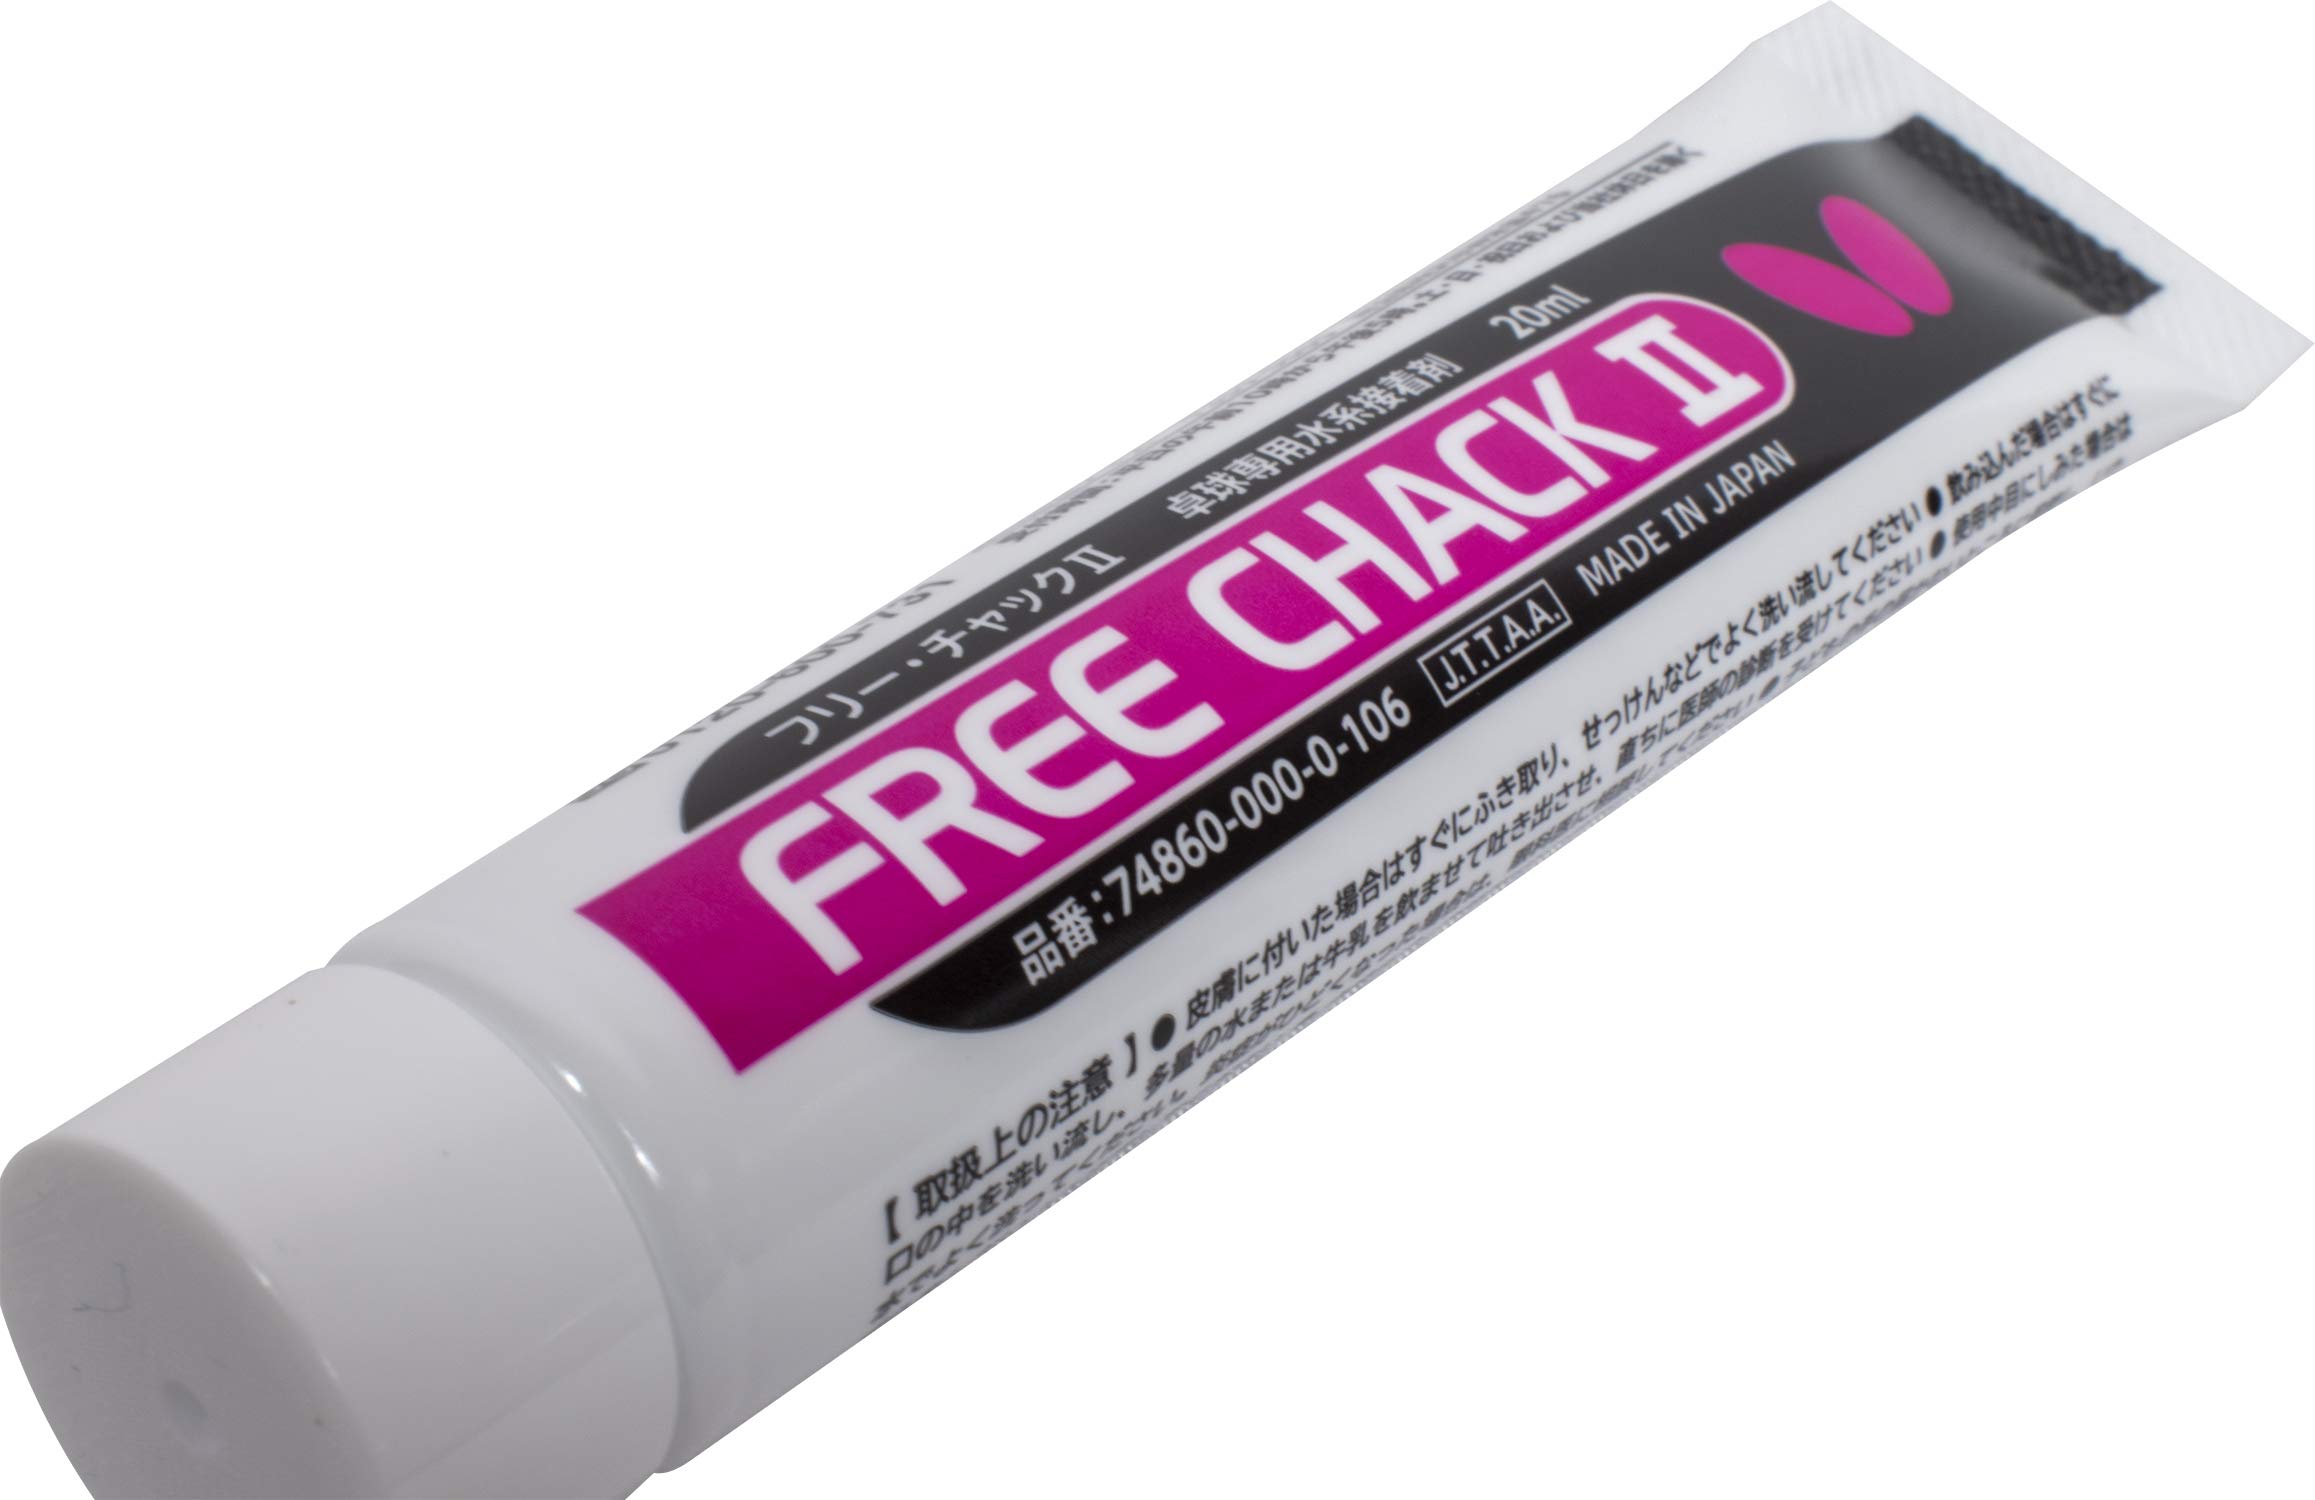 Butterfly Free chack II Table Tennis Racket glue - Designed Specifically for use with Spring Sponge Rubber Like Tenergy and Dign